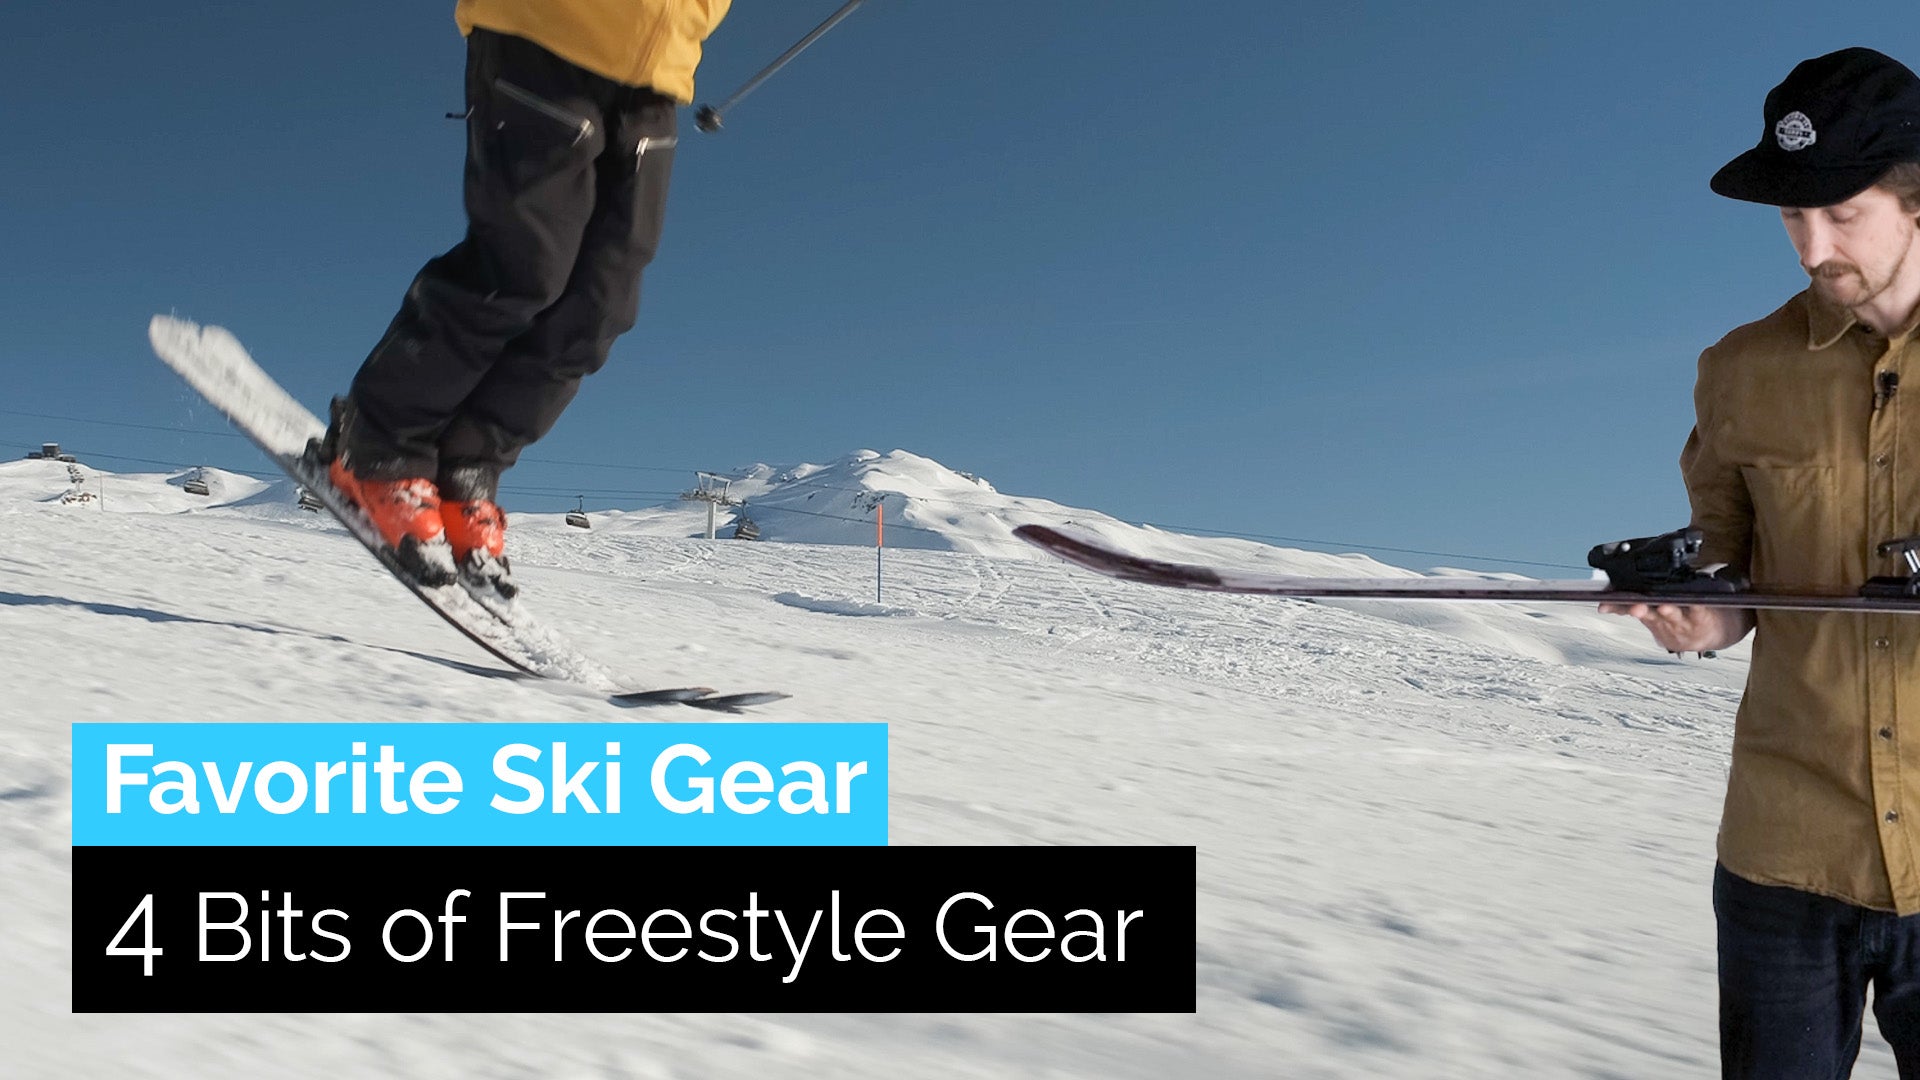 Top Freestyle Ski Gear Long-Term Review | Favorite 4 Bits of Gear